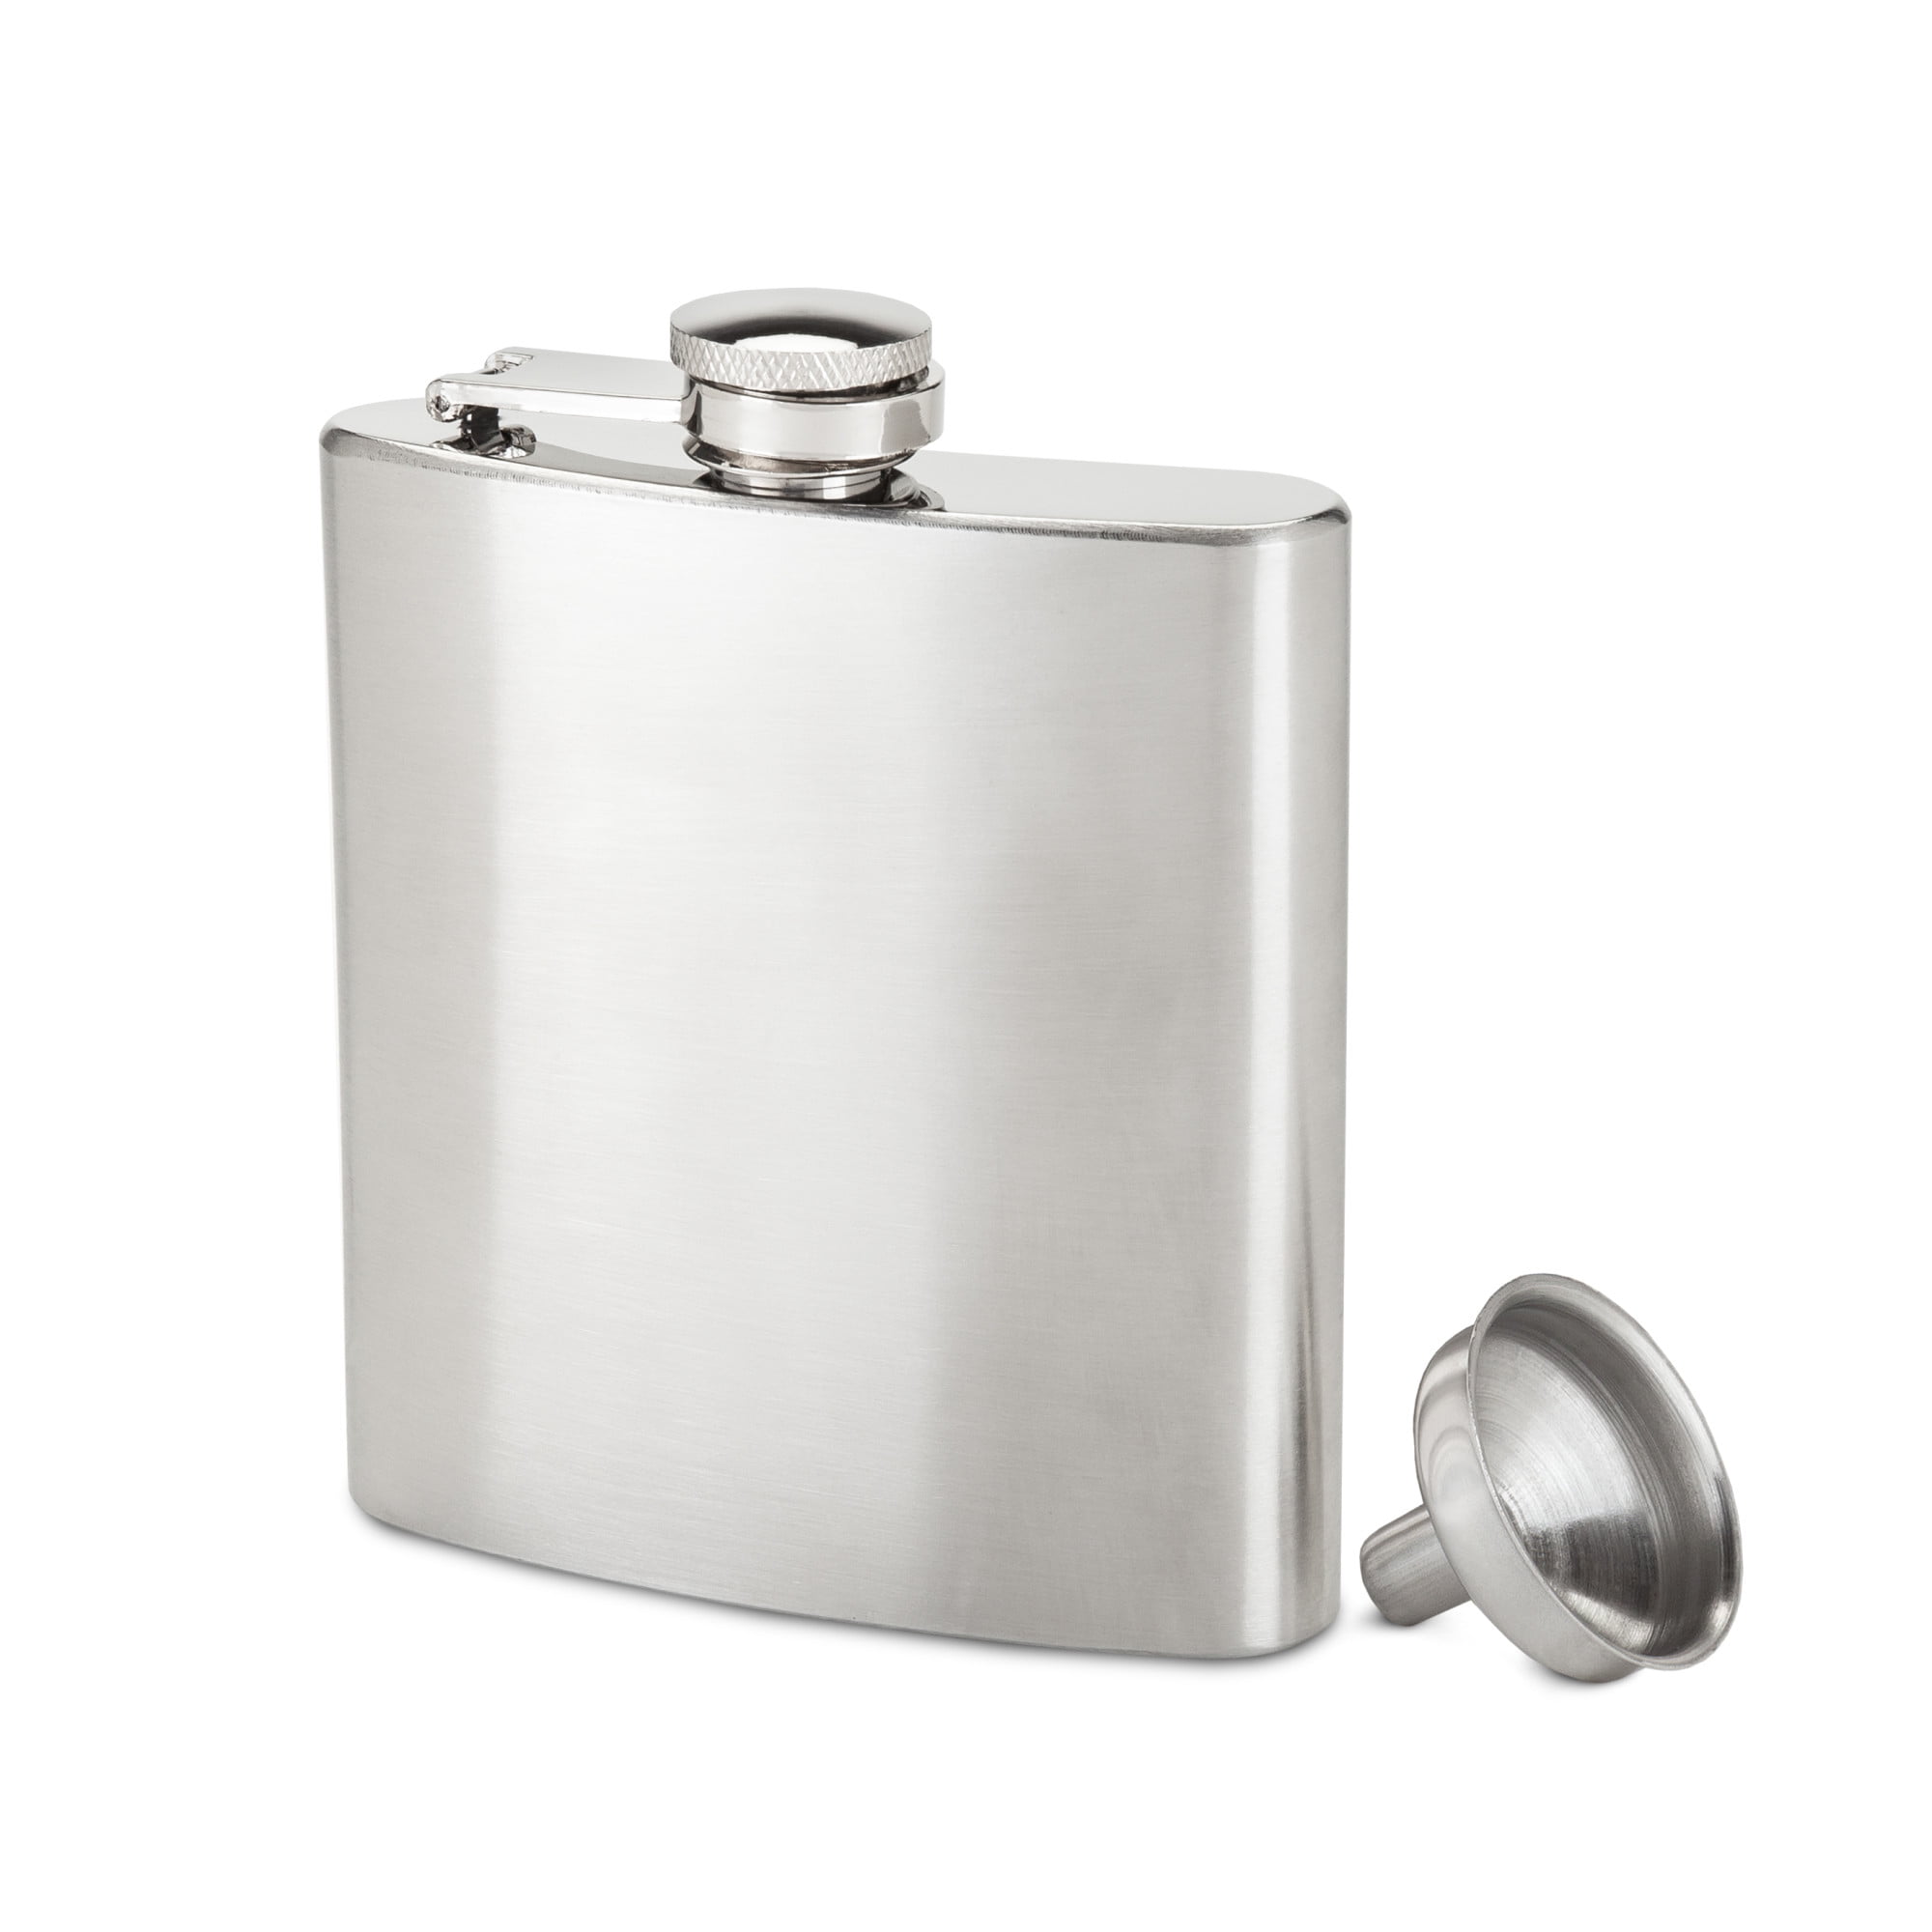 Free Shipping Details about   Funny 6oz Prescription Tequila stainless steel Flask with funnel 